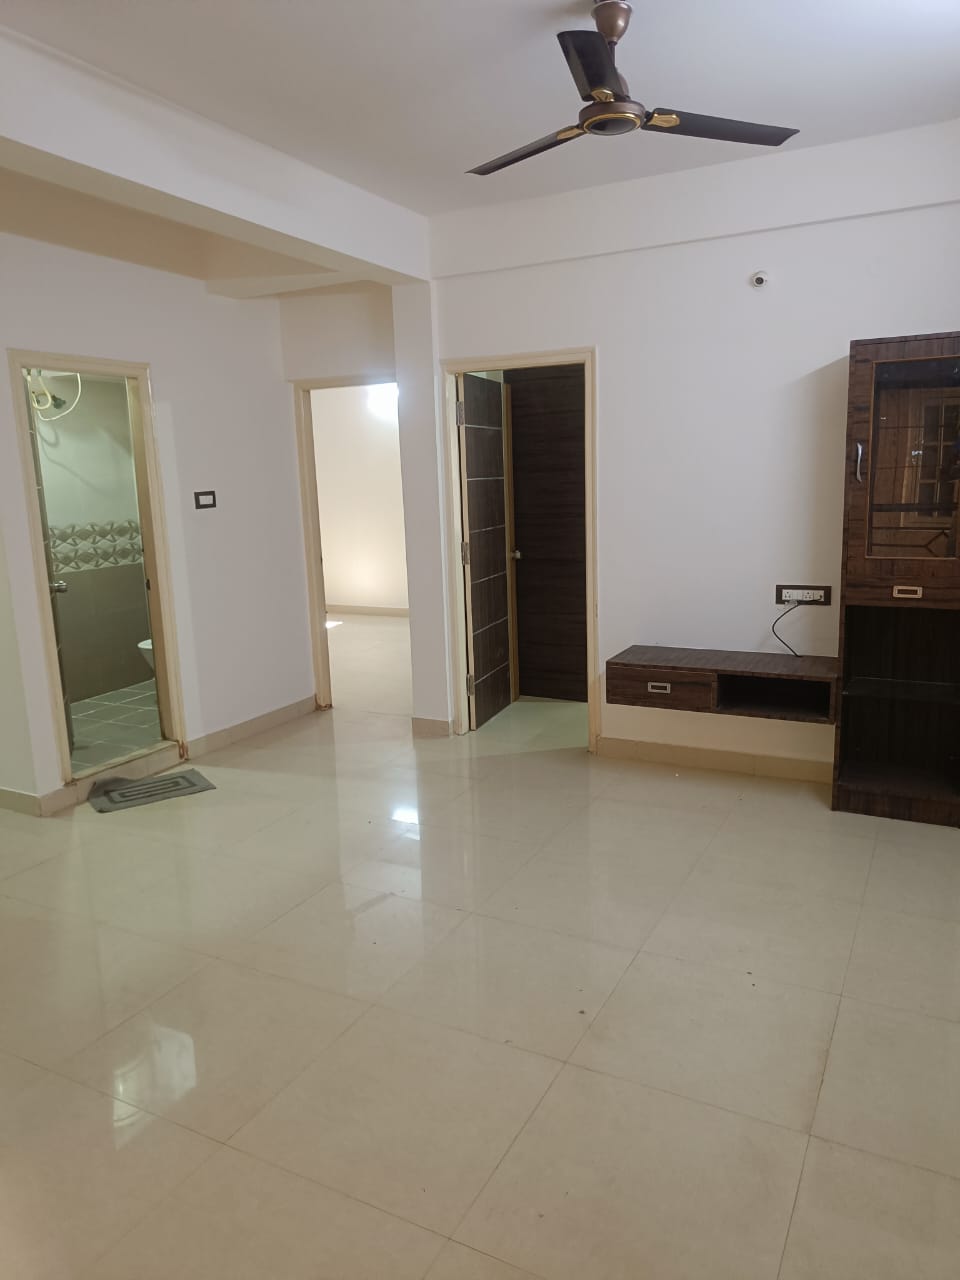 2 BHK Independent House for Lease Only at JAML2 - 2507 in Vijaya Bank Colony